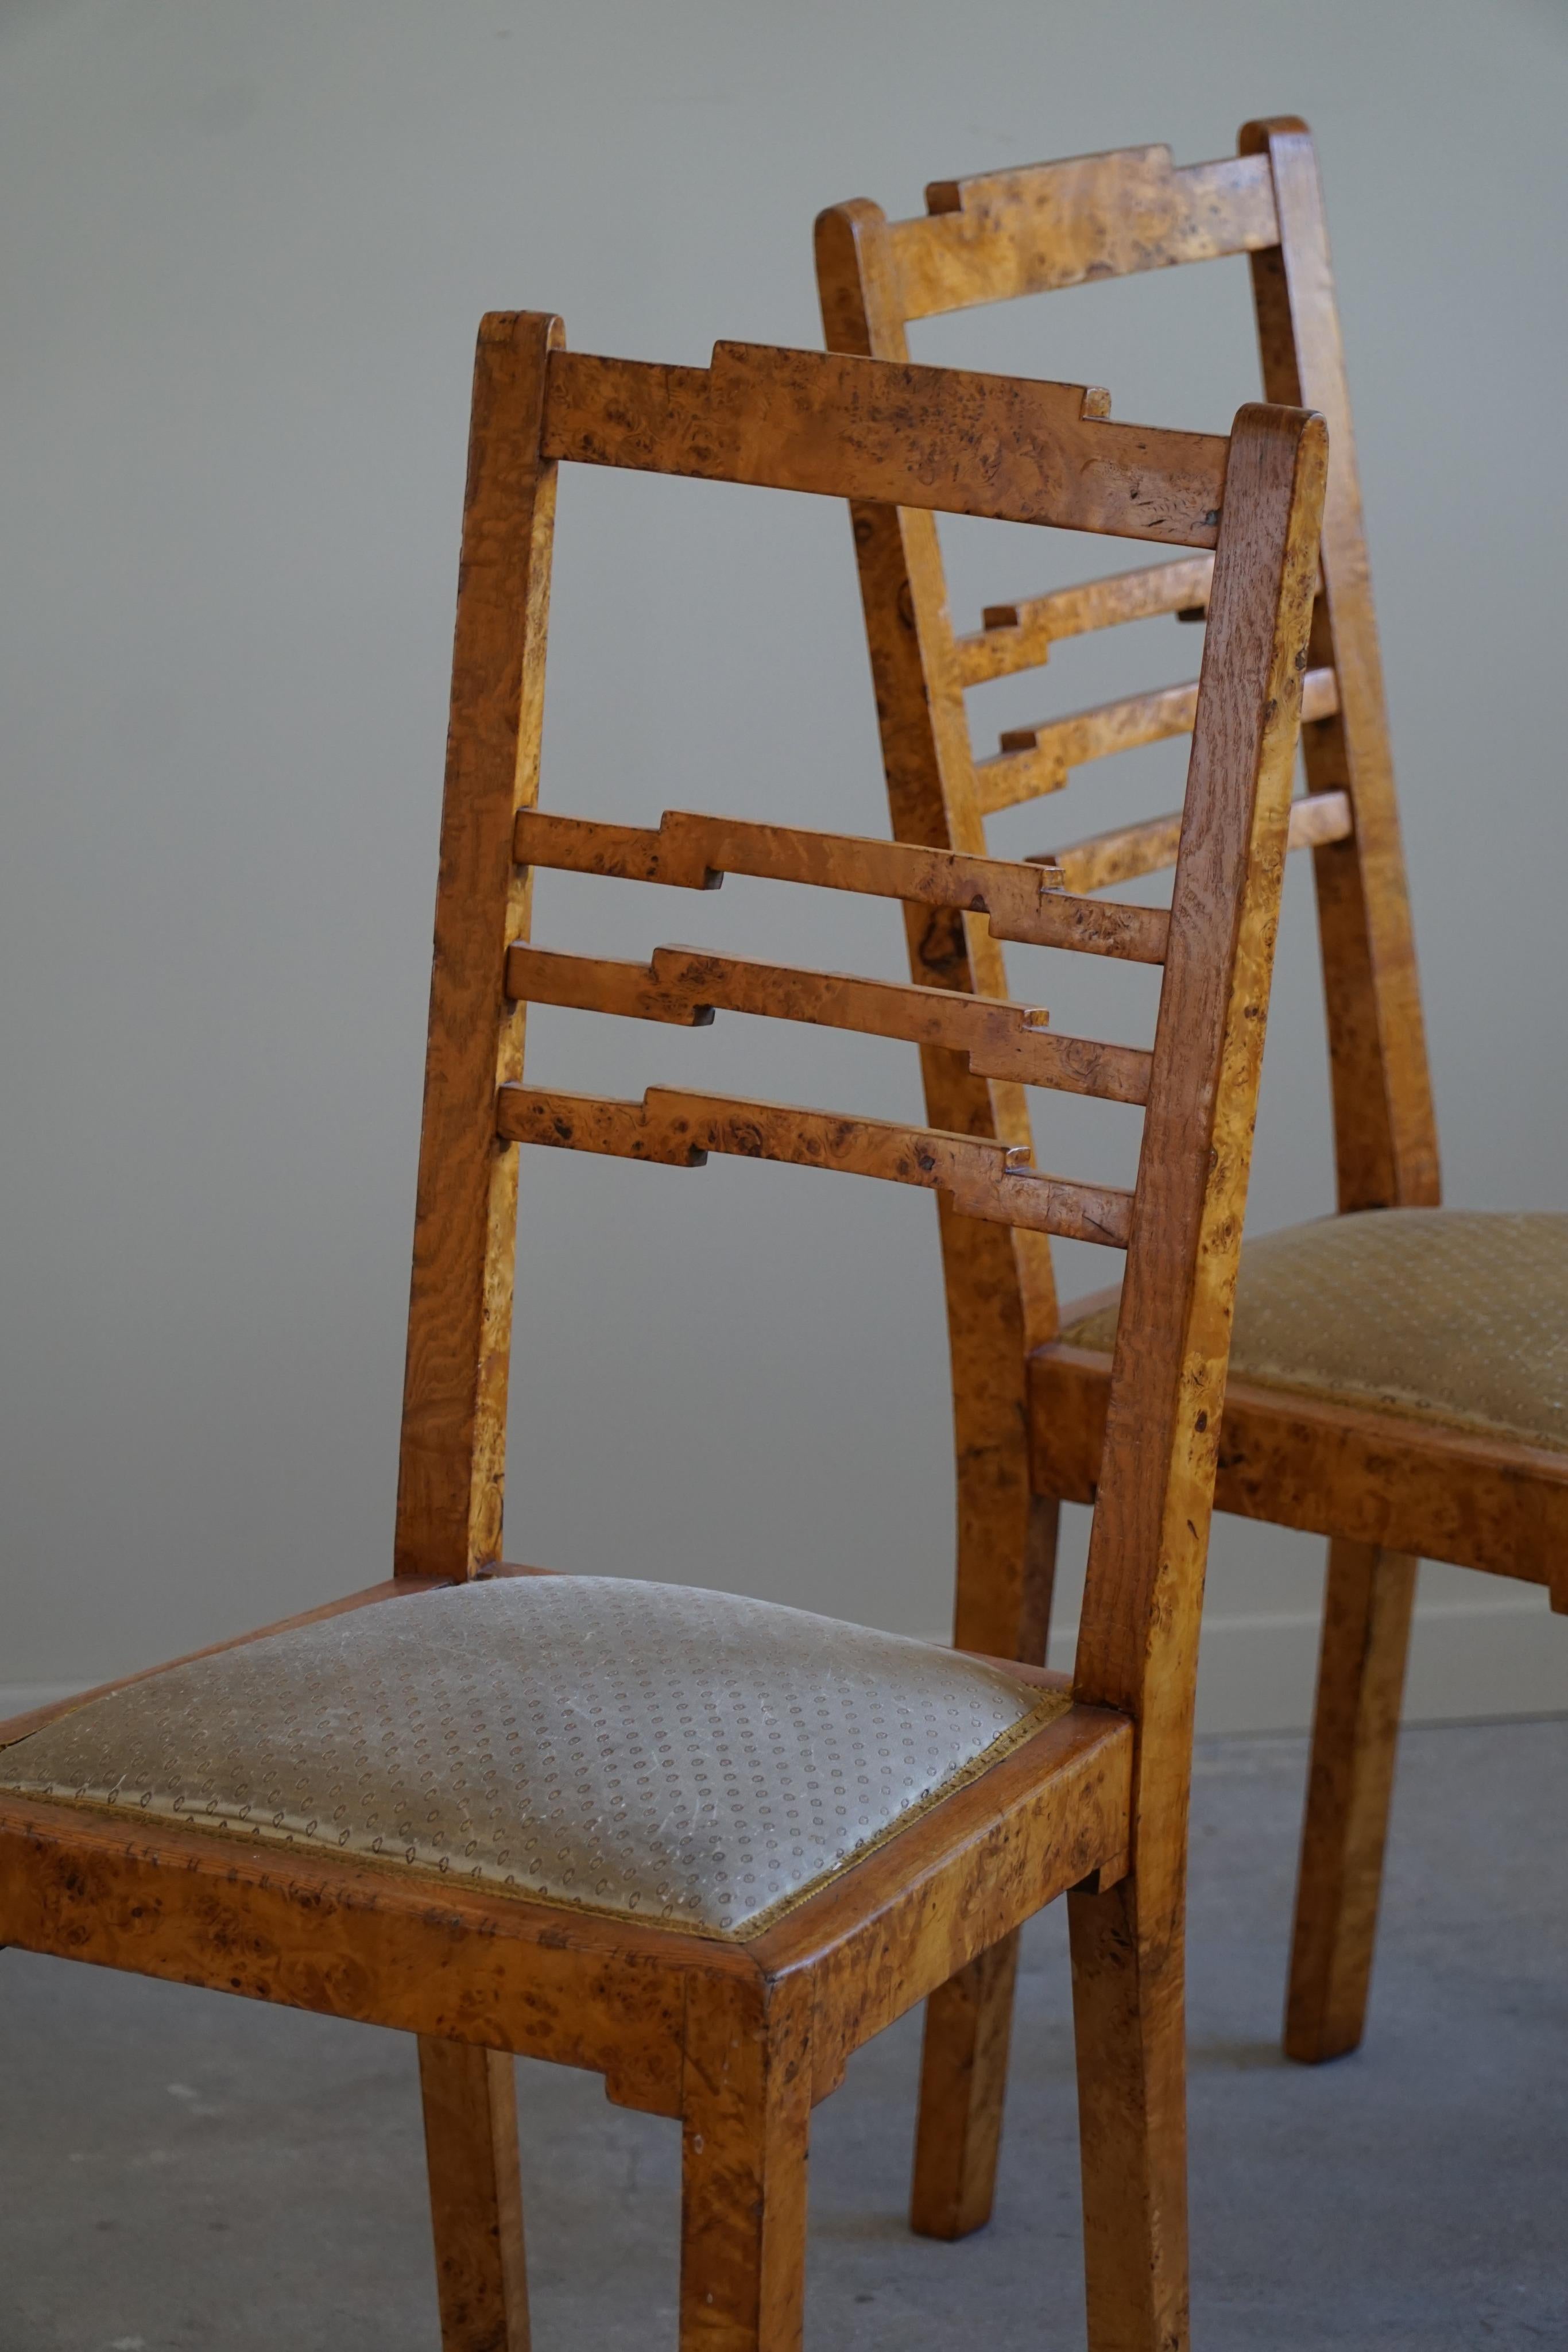 A Pair of Swedish Art Deco Dining Room Chairs in Birch, 1920s For Sale 10